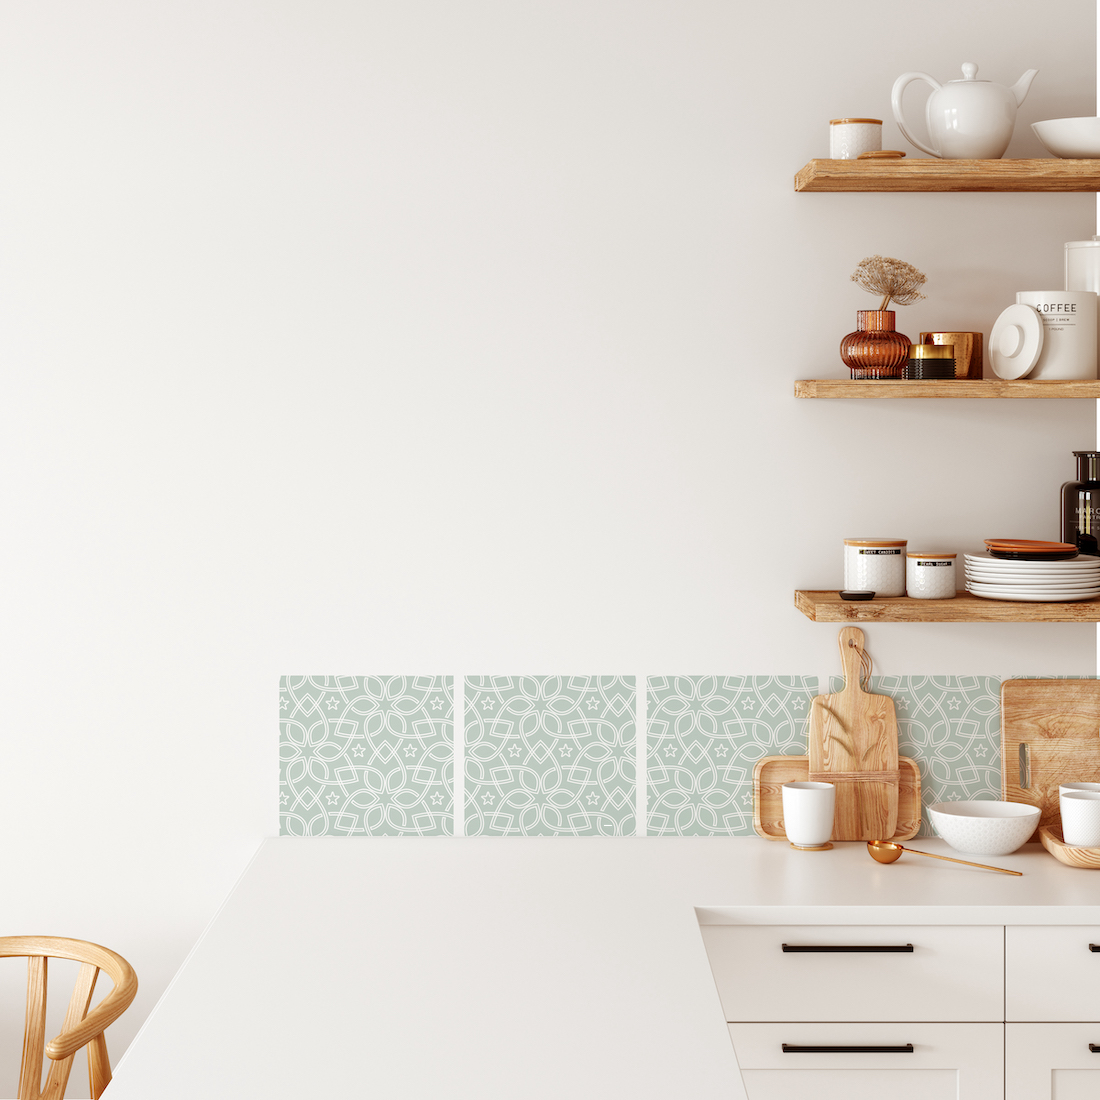 Removable wall sticker tiles in kitchen in green